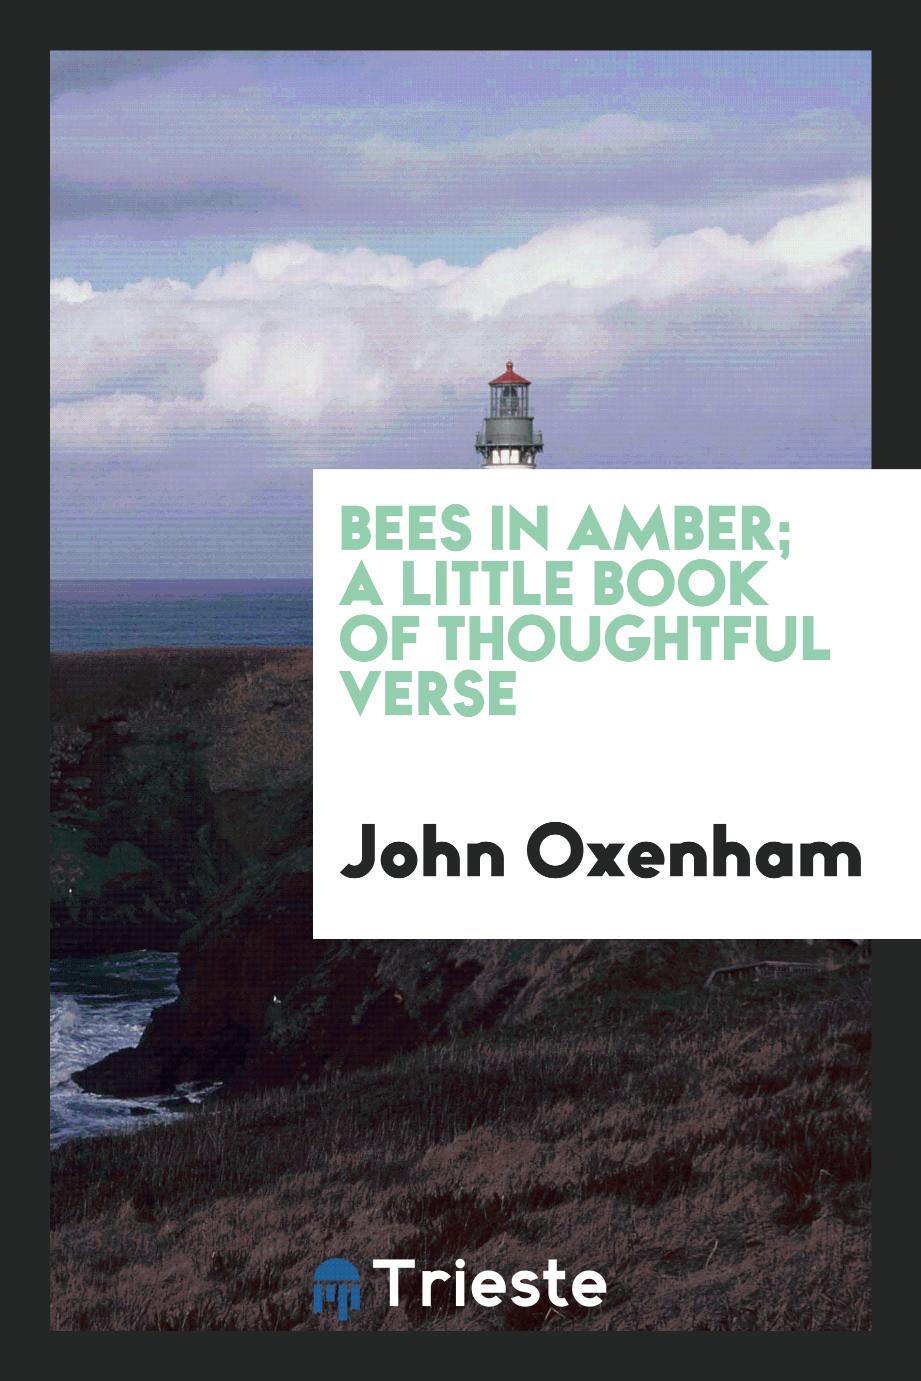 Bees in amber; a little book of thoughtful verse